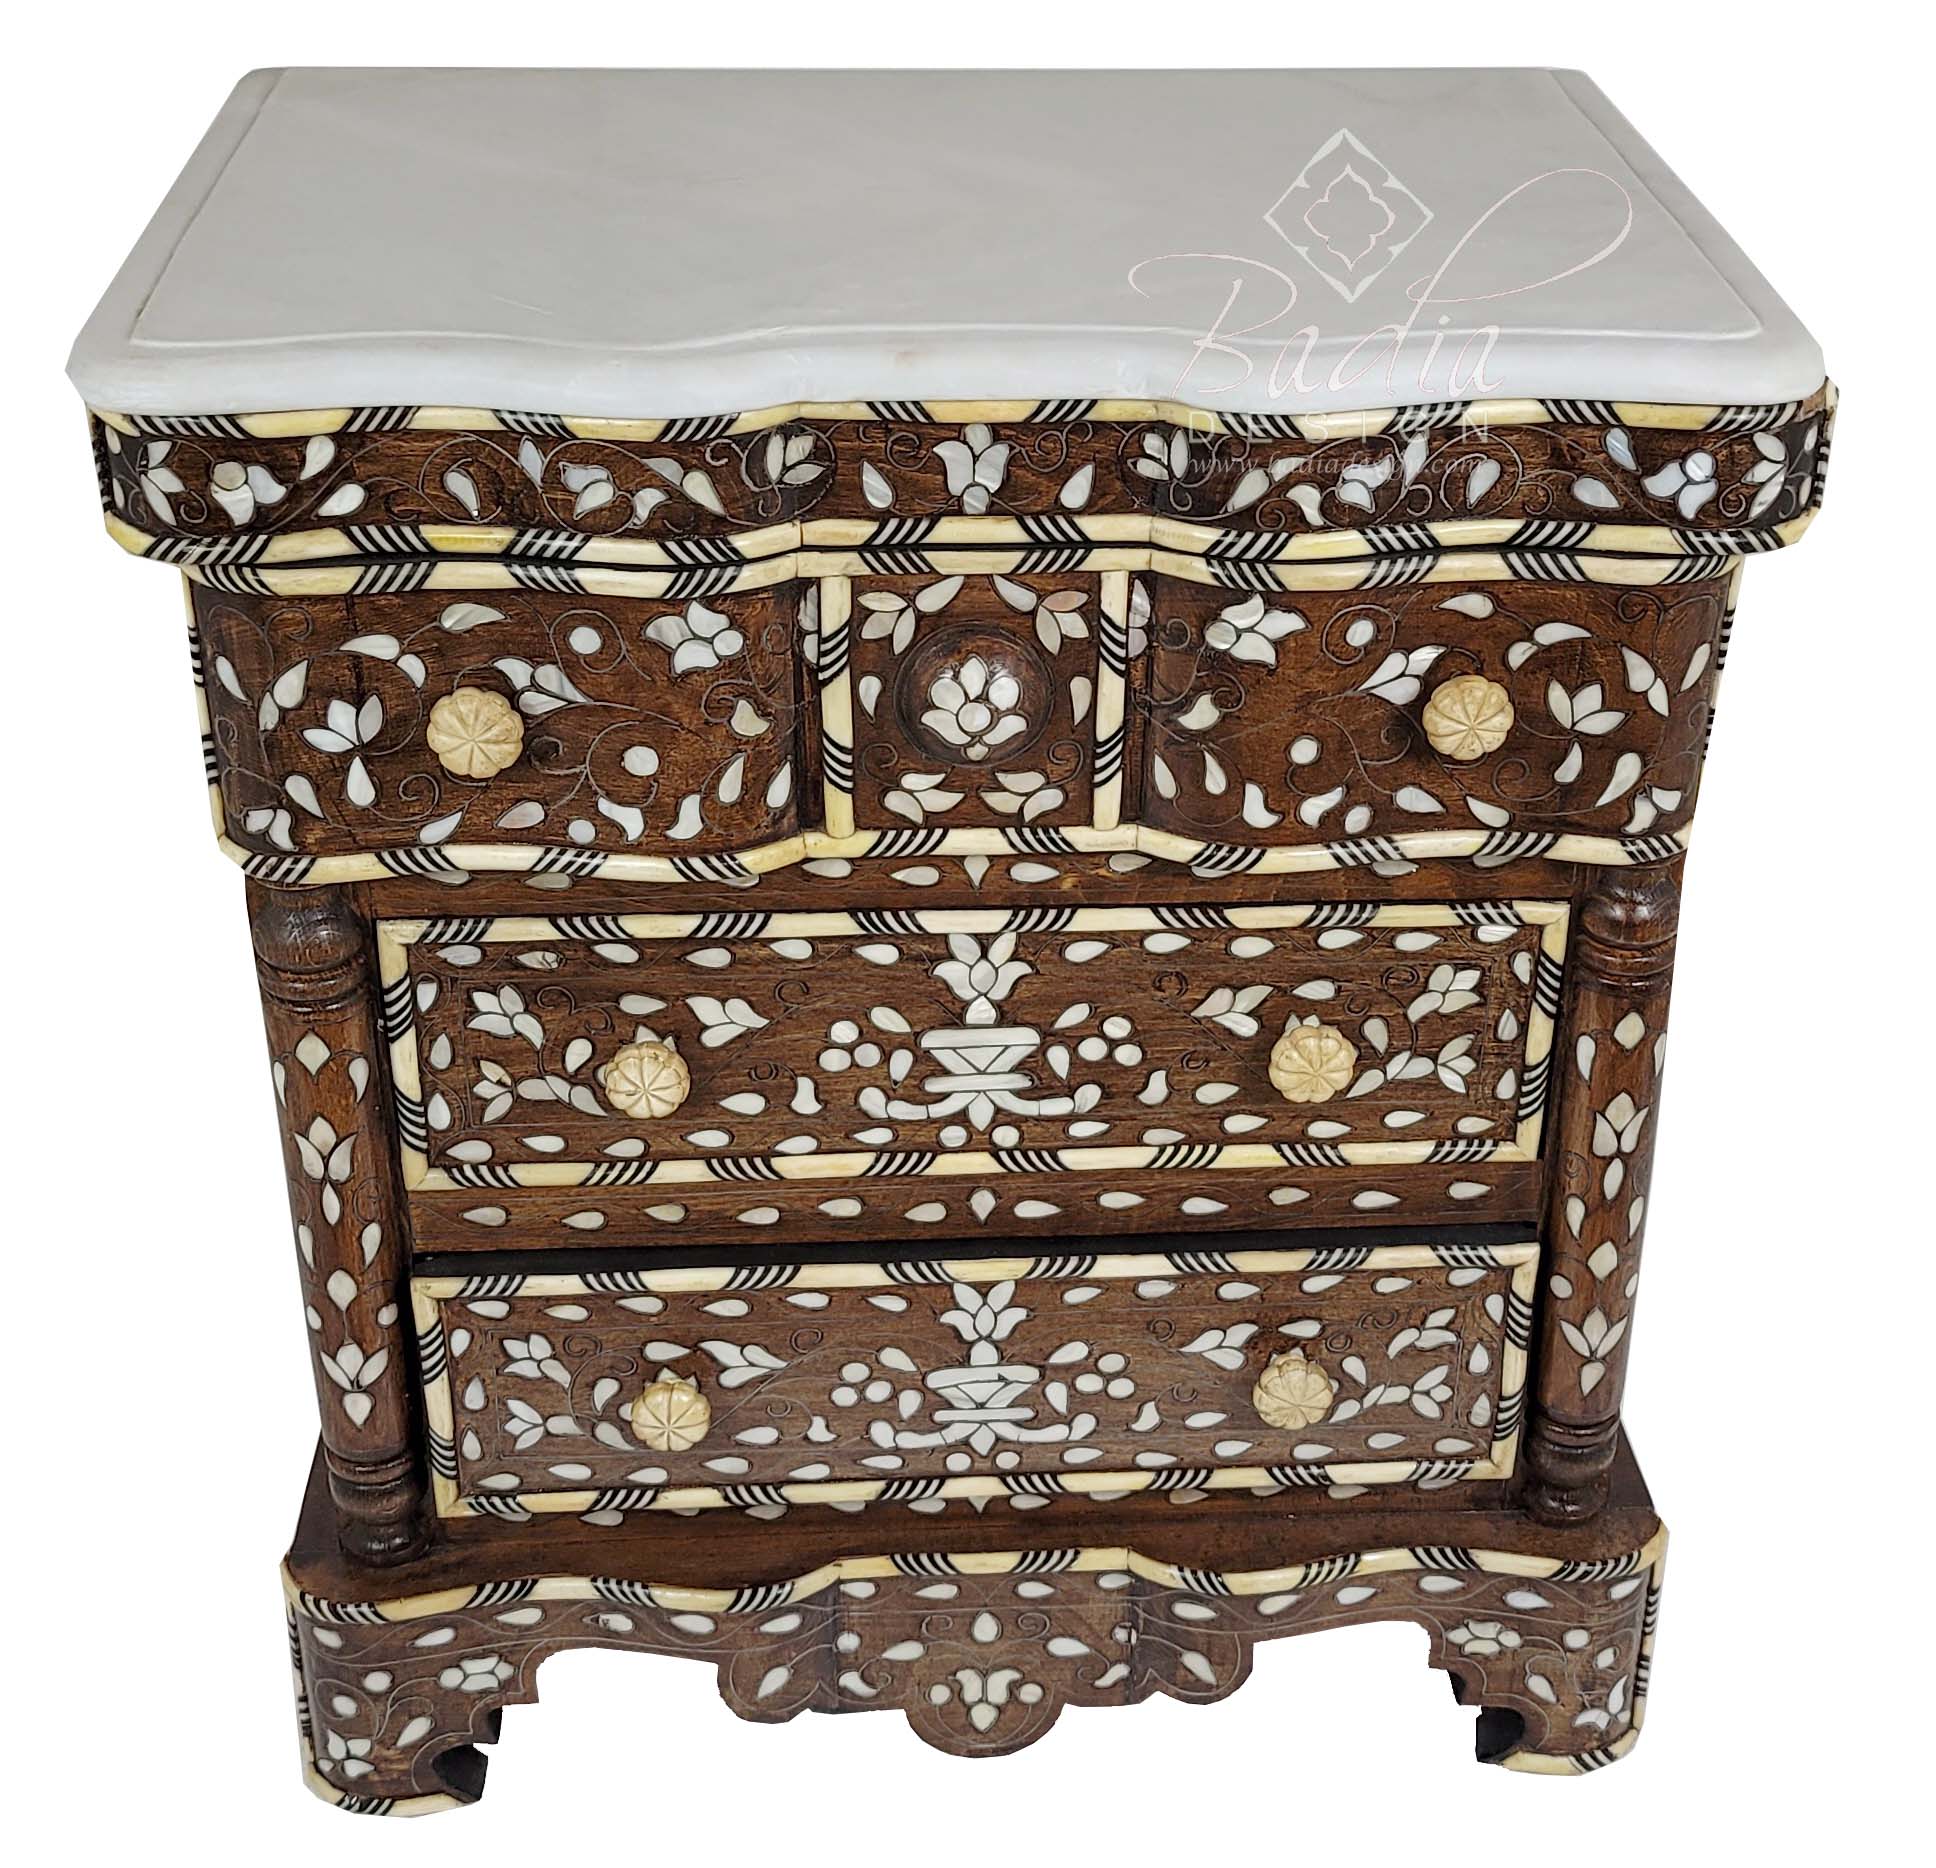 moroccan-bone-inlay-nightstand-with-three-drawers-mop-dr064-1.jpg